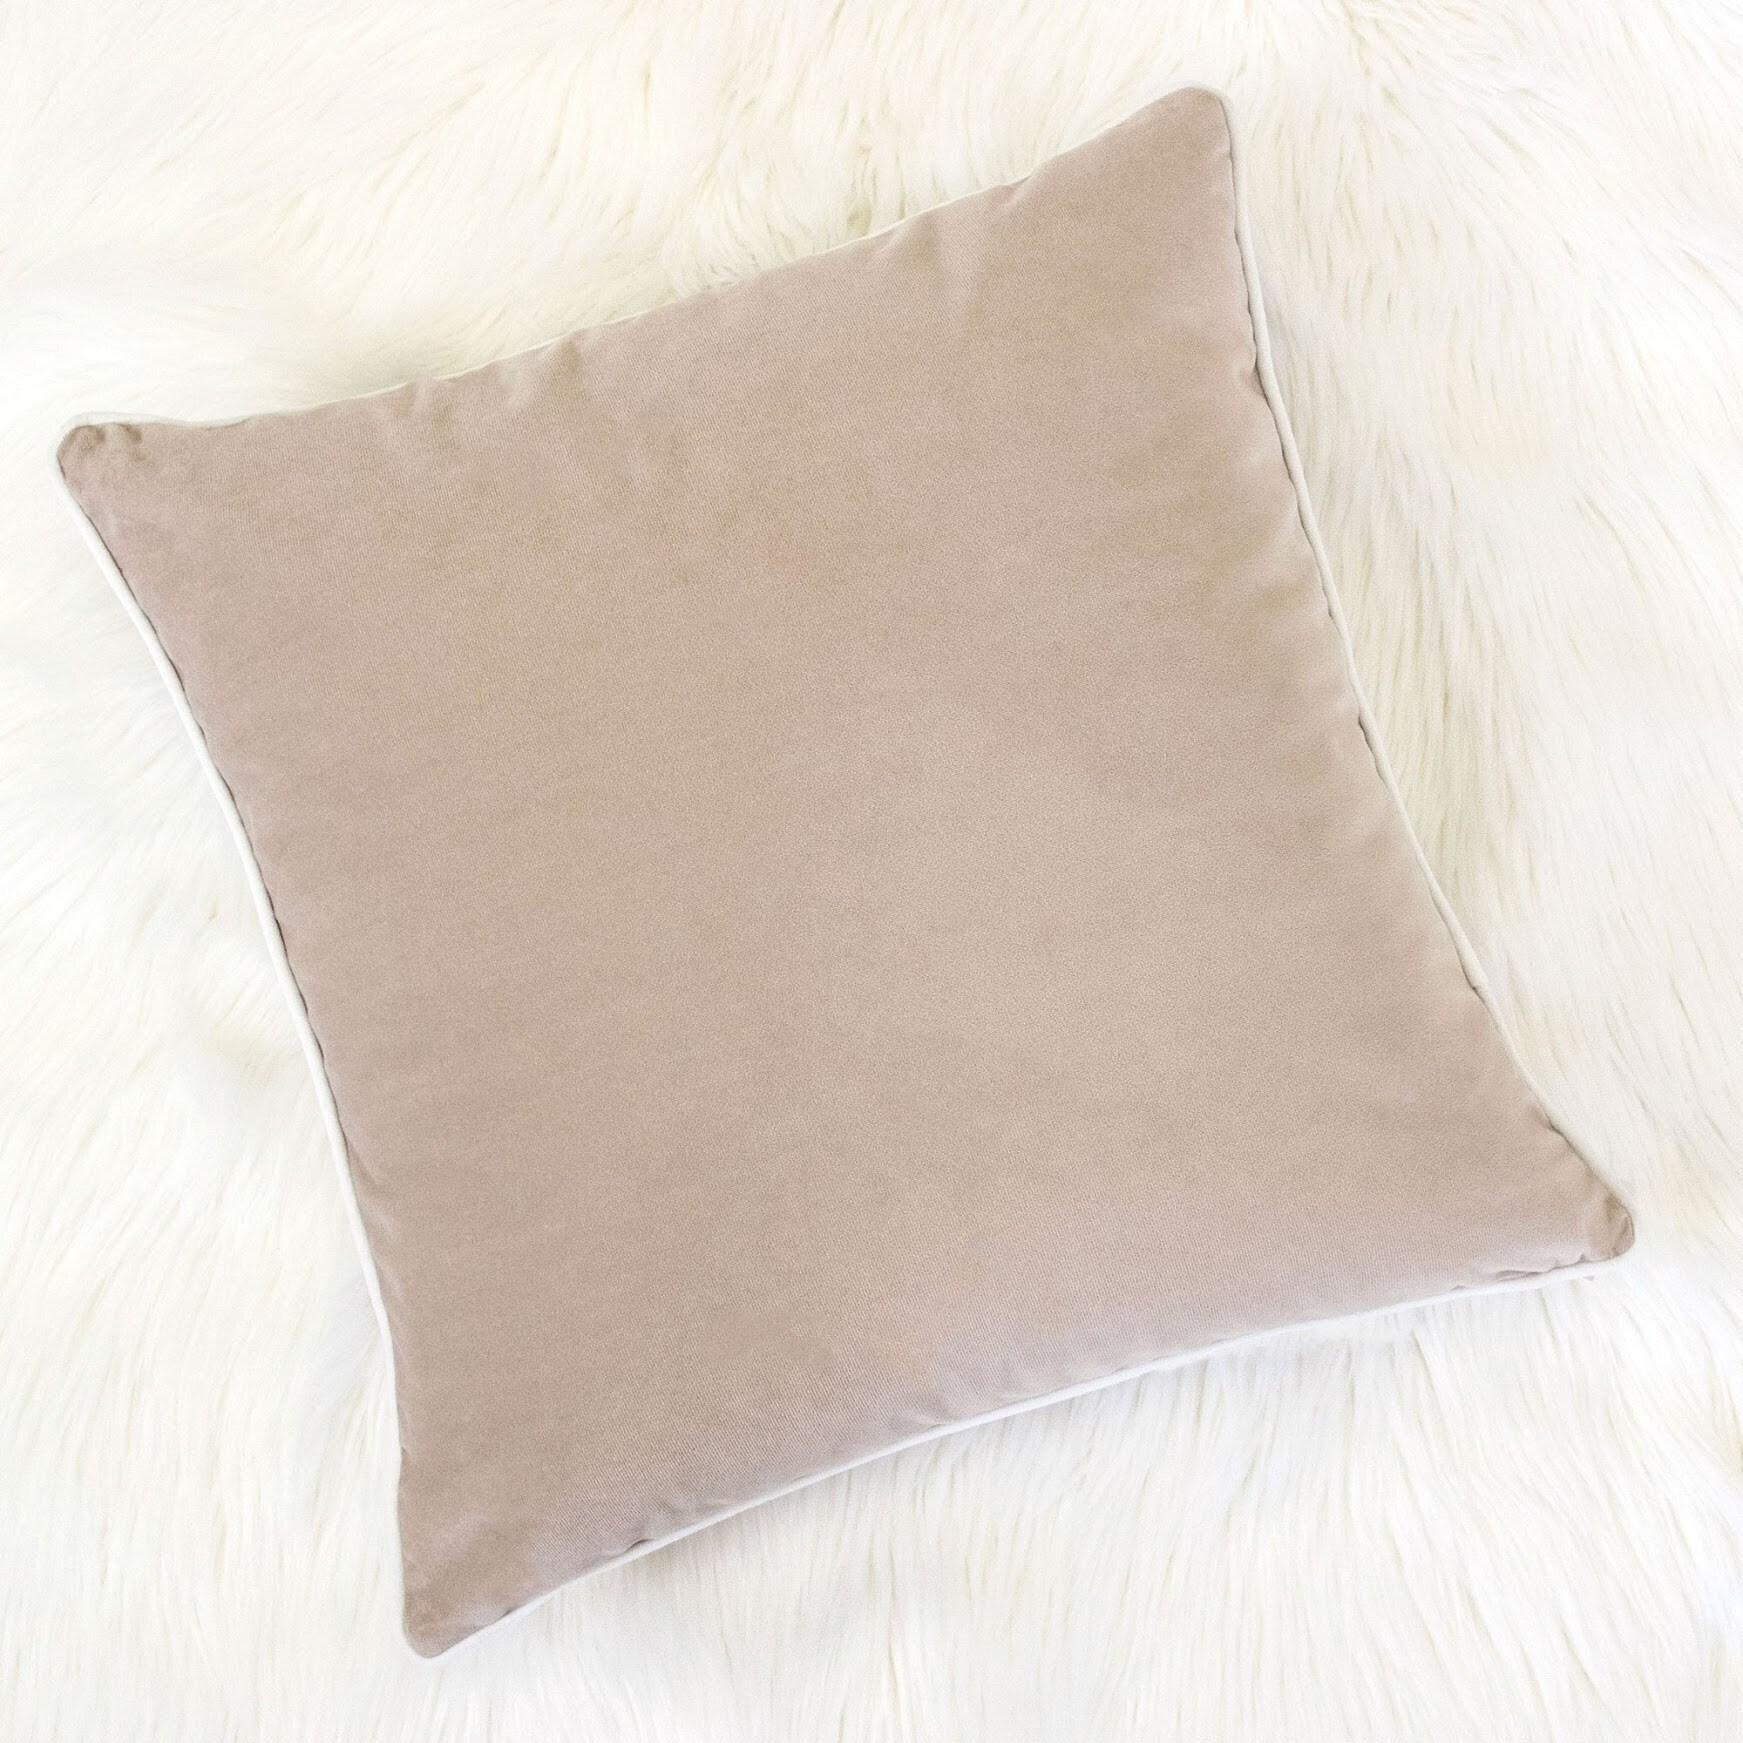 https://ak1.ostkcdn.com/images/products/is/images/direct/018884286b17bb6b1ae21dc69ef4df20e36edf21/Homey-Cozy-Classical-Velvet-Solid-Throw-Pillow-Cover-%26-Insert.jpg